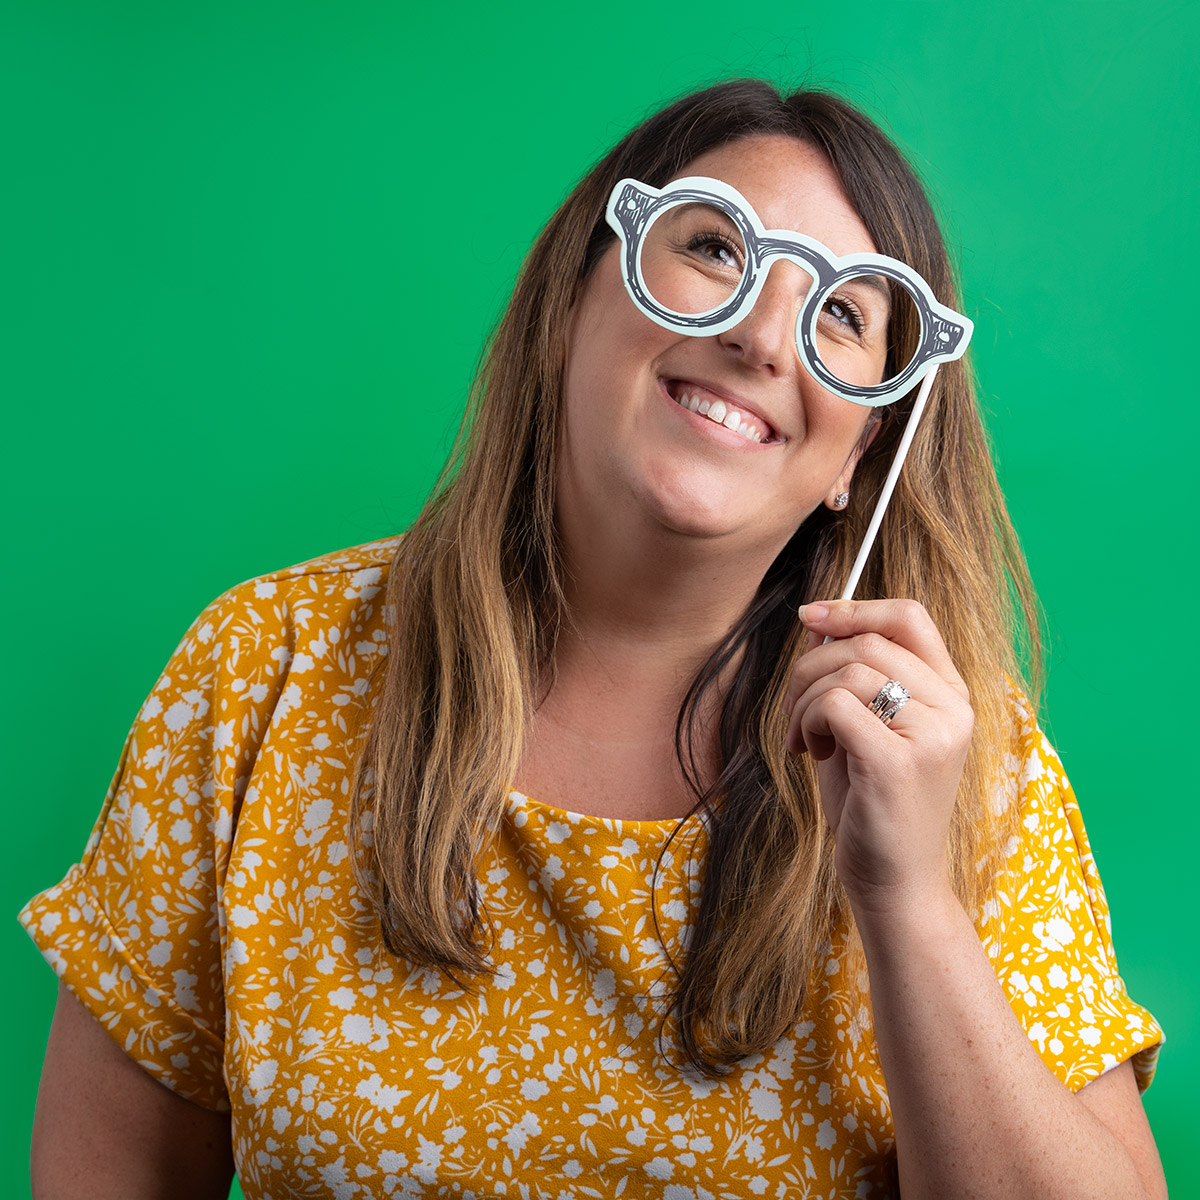 A woman smiling against a green backdrop, while holding up decorative prop glasses.